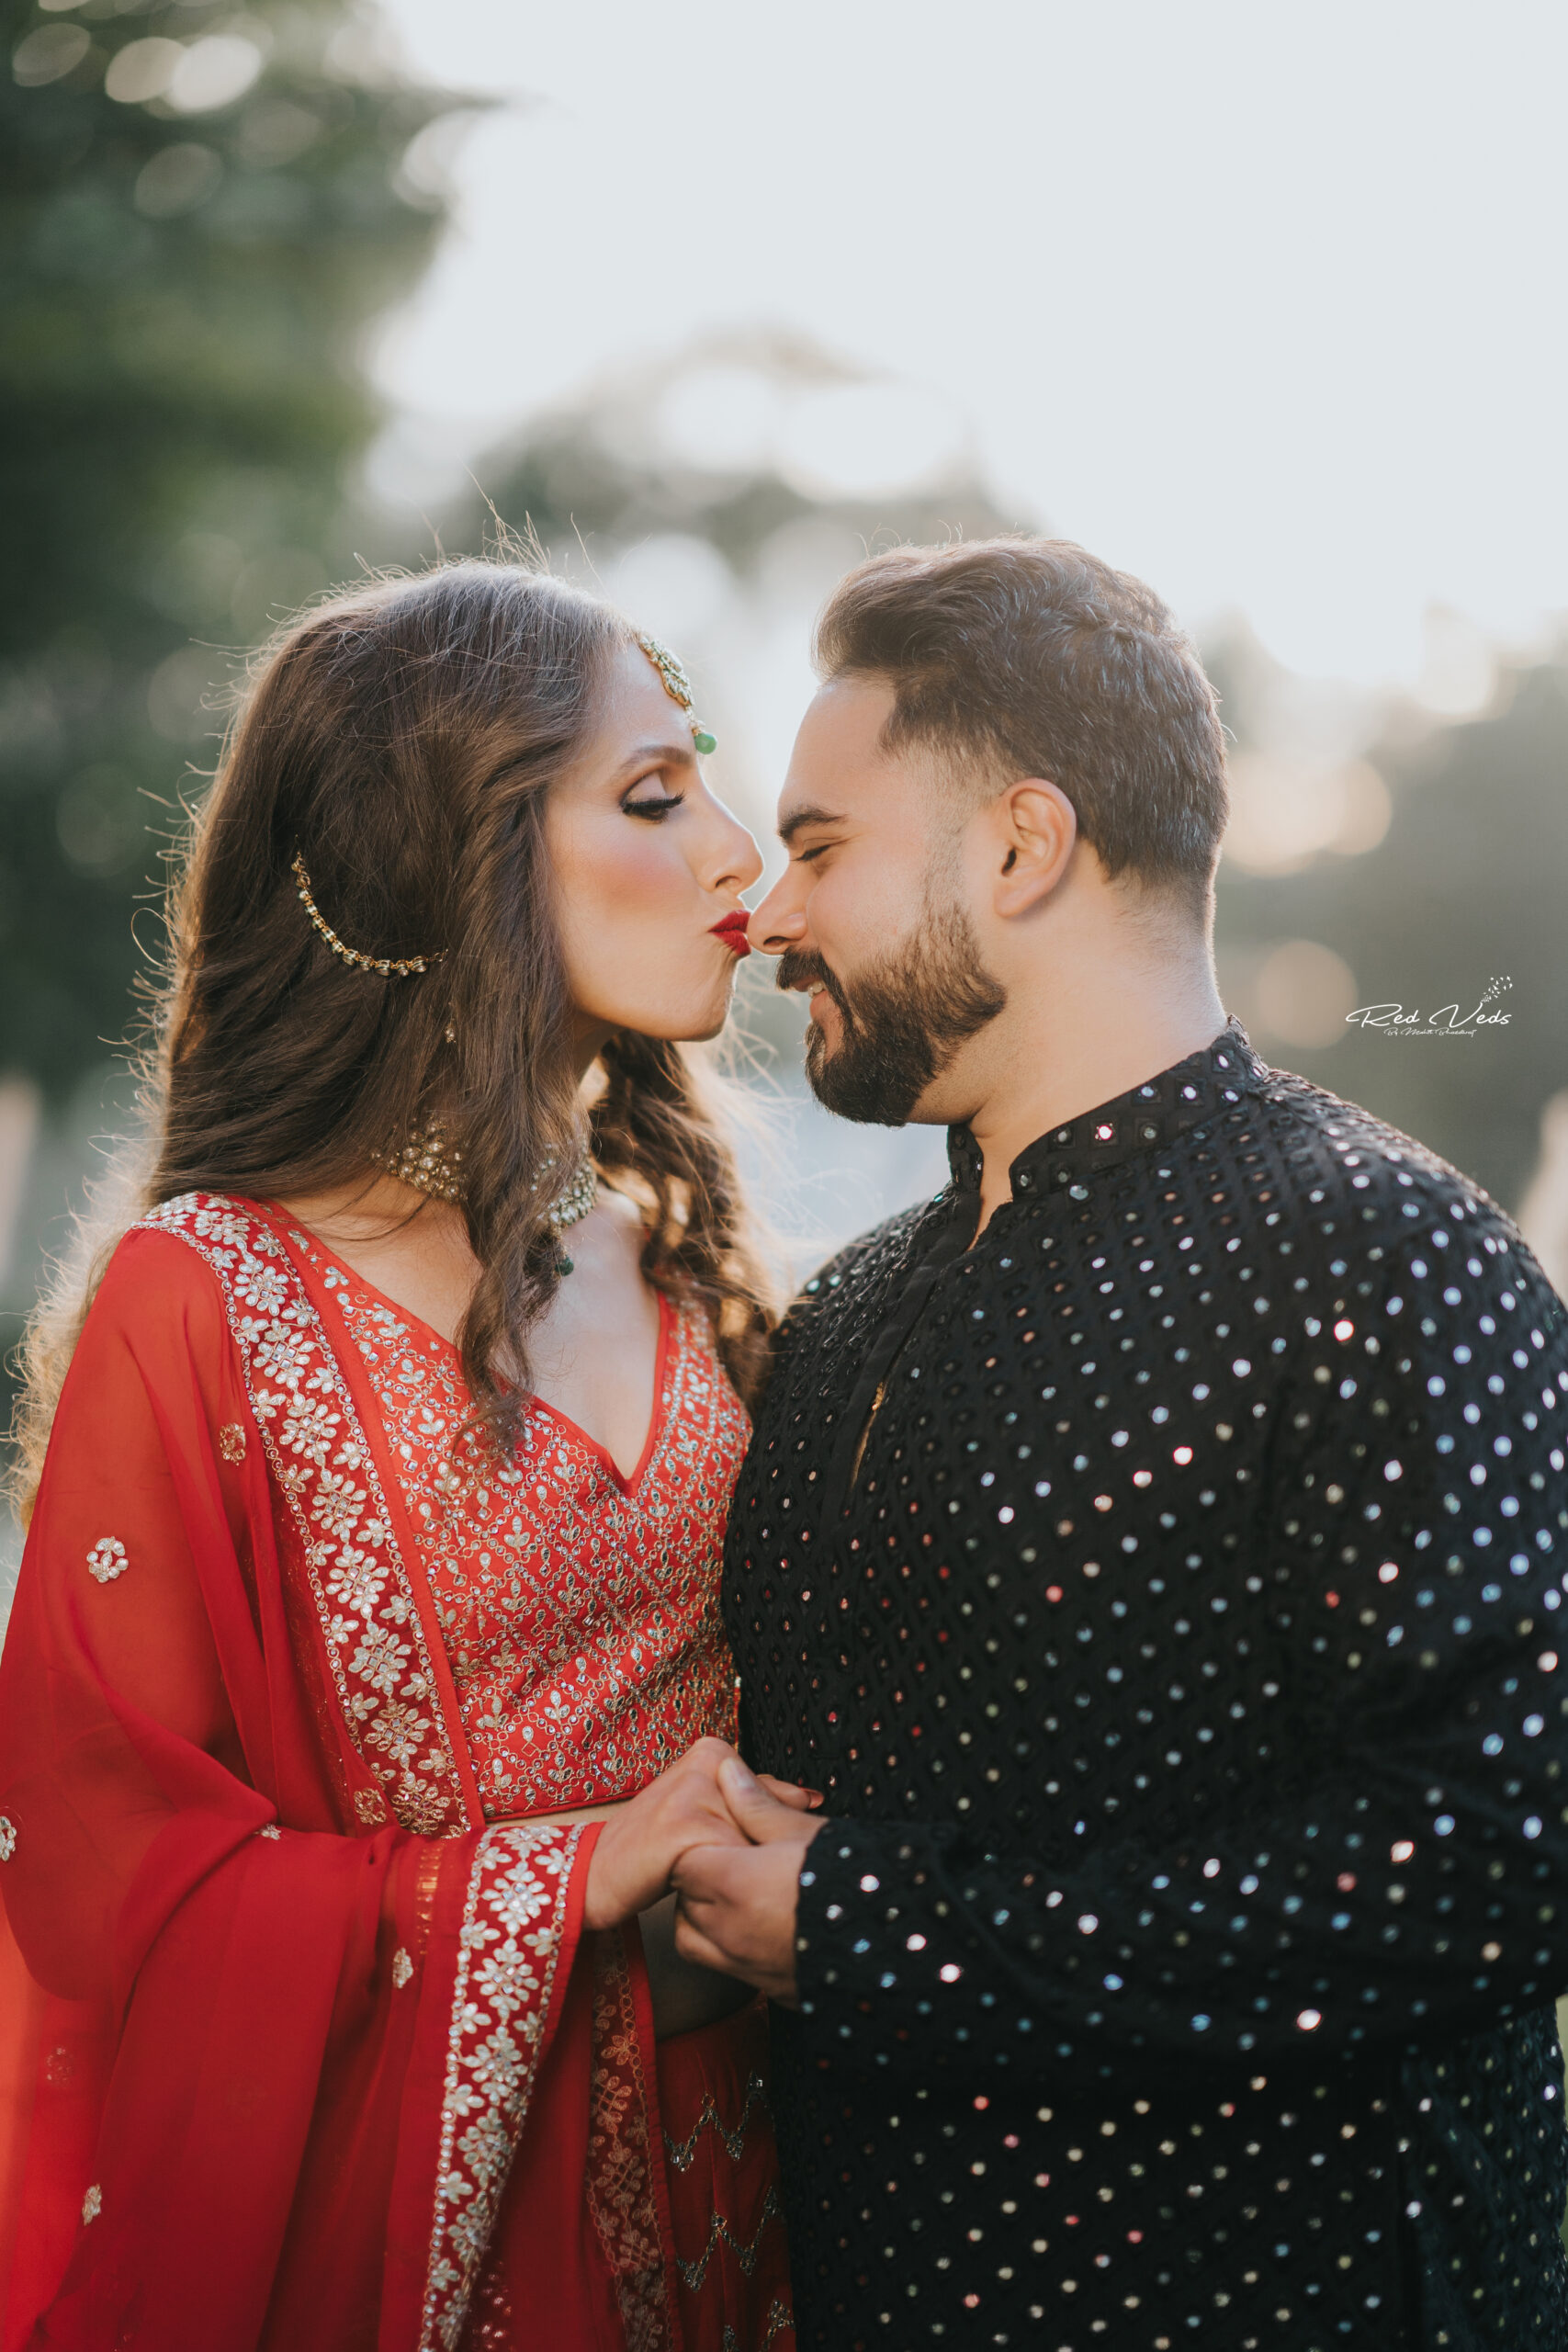 11 Awesome Prewedding Shoot Ideas You Just Can't Miss!